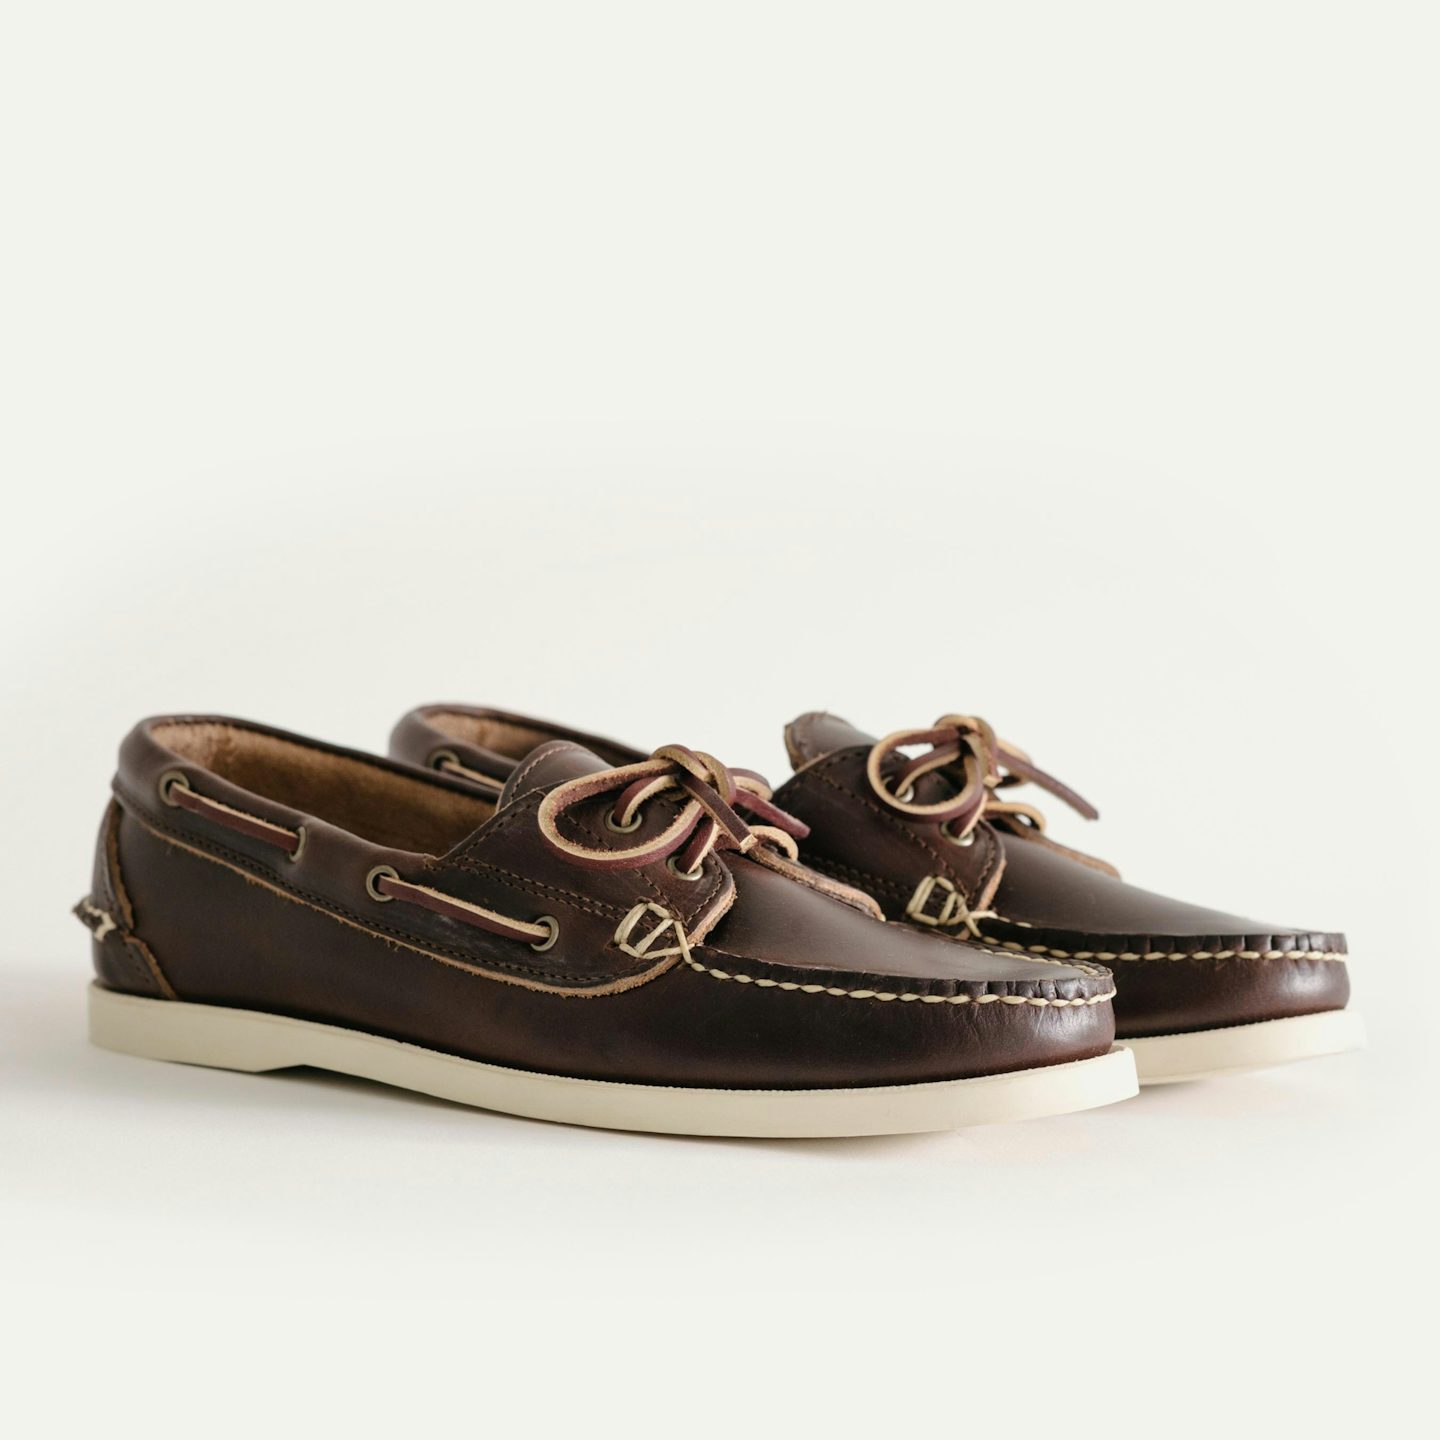 boat shoes thick sole